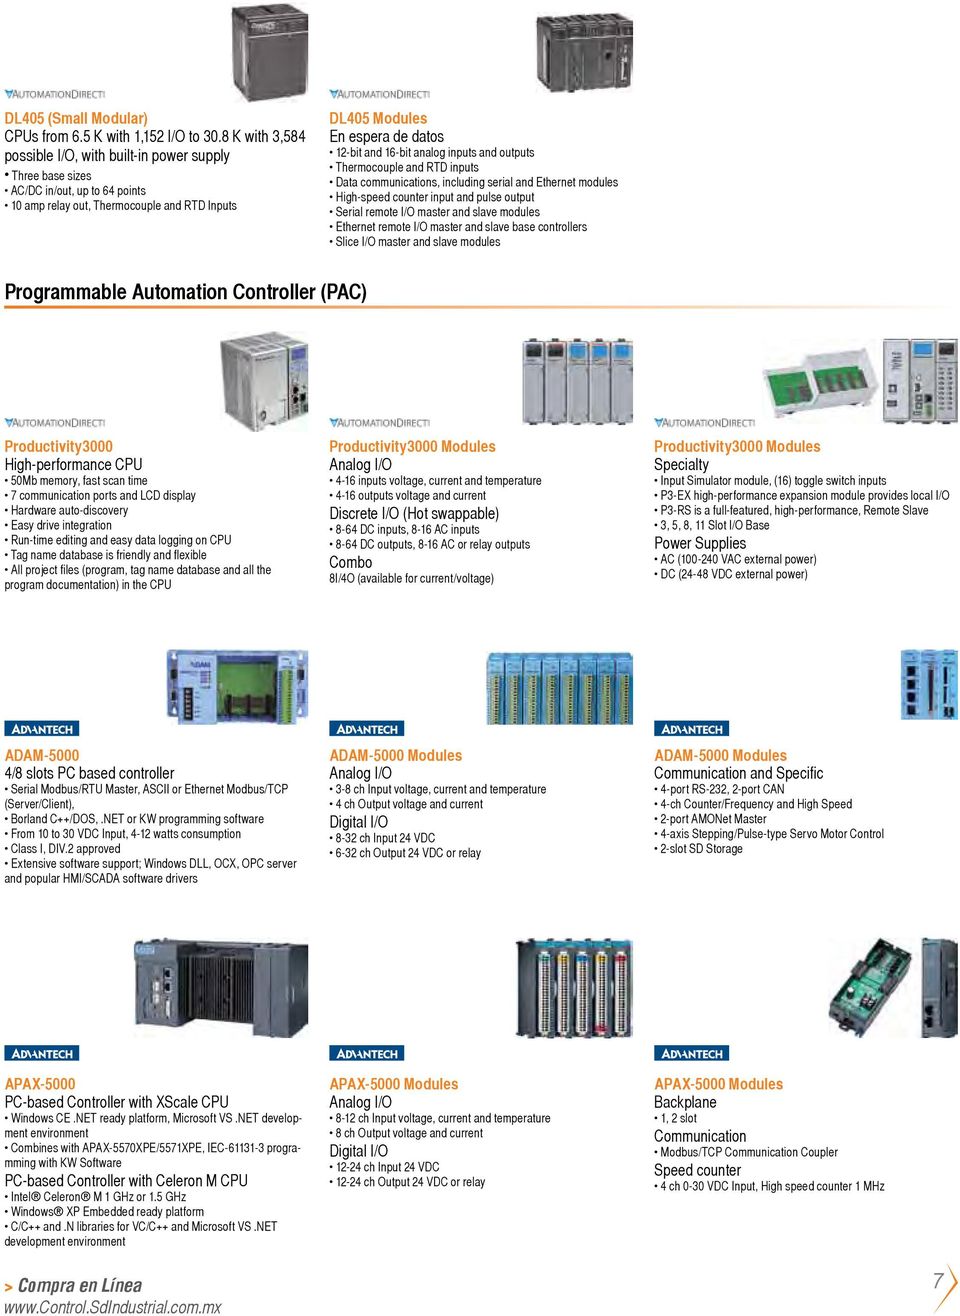 analog inputs and outputs Thermocouple and RTD inputs Data communications, including serial and Ethernet modules High-speed counter input and pulse output Serial remote I/O master and slave modules